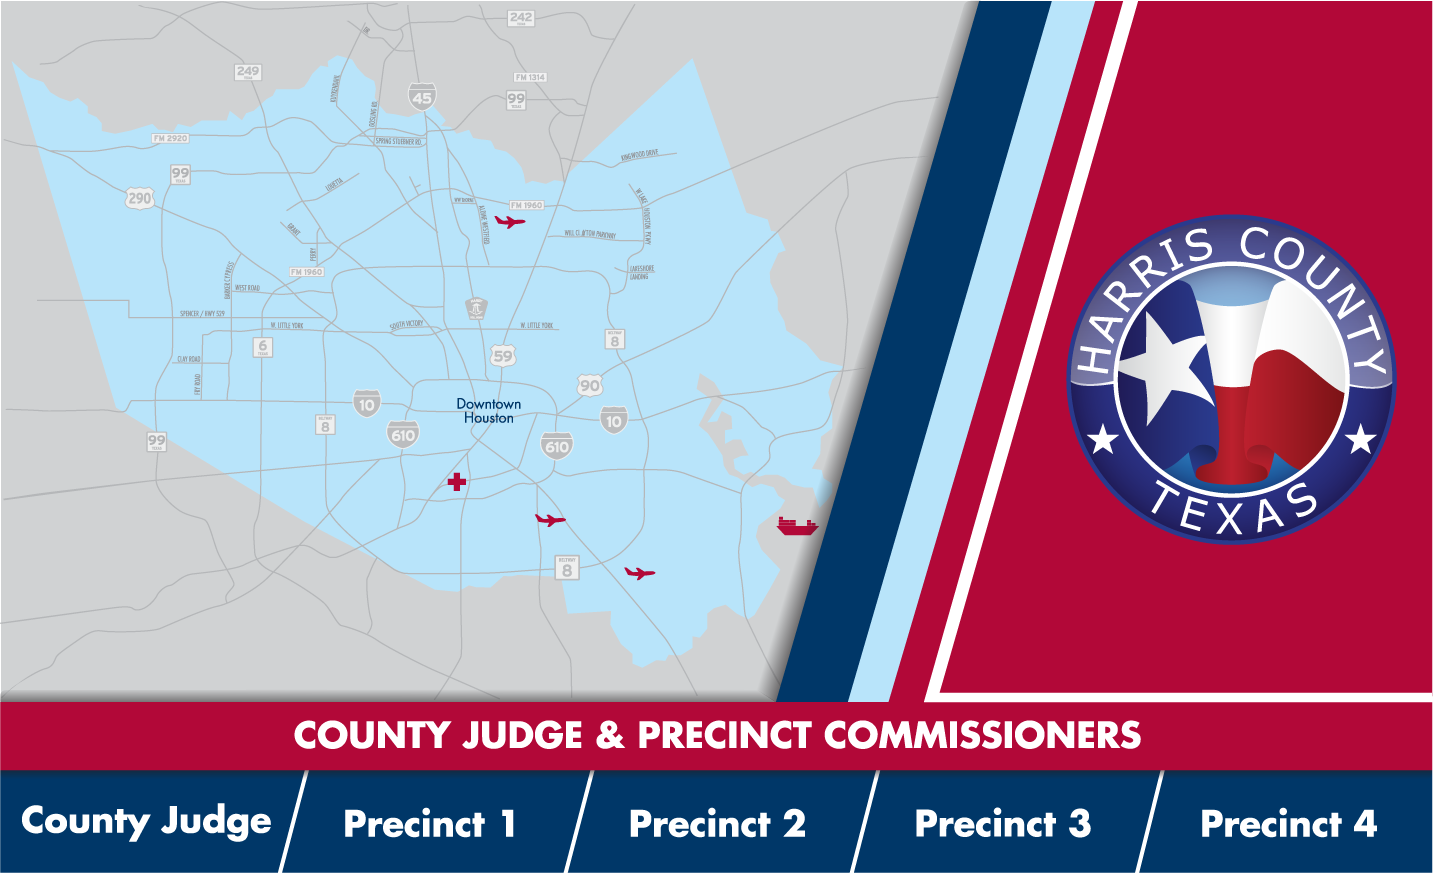 Image map showing the area outline and logo of Harris County